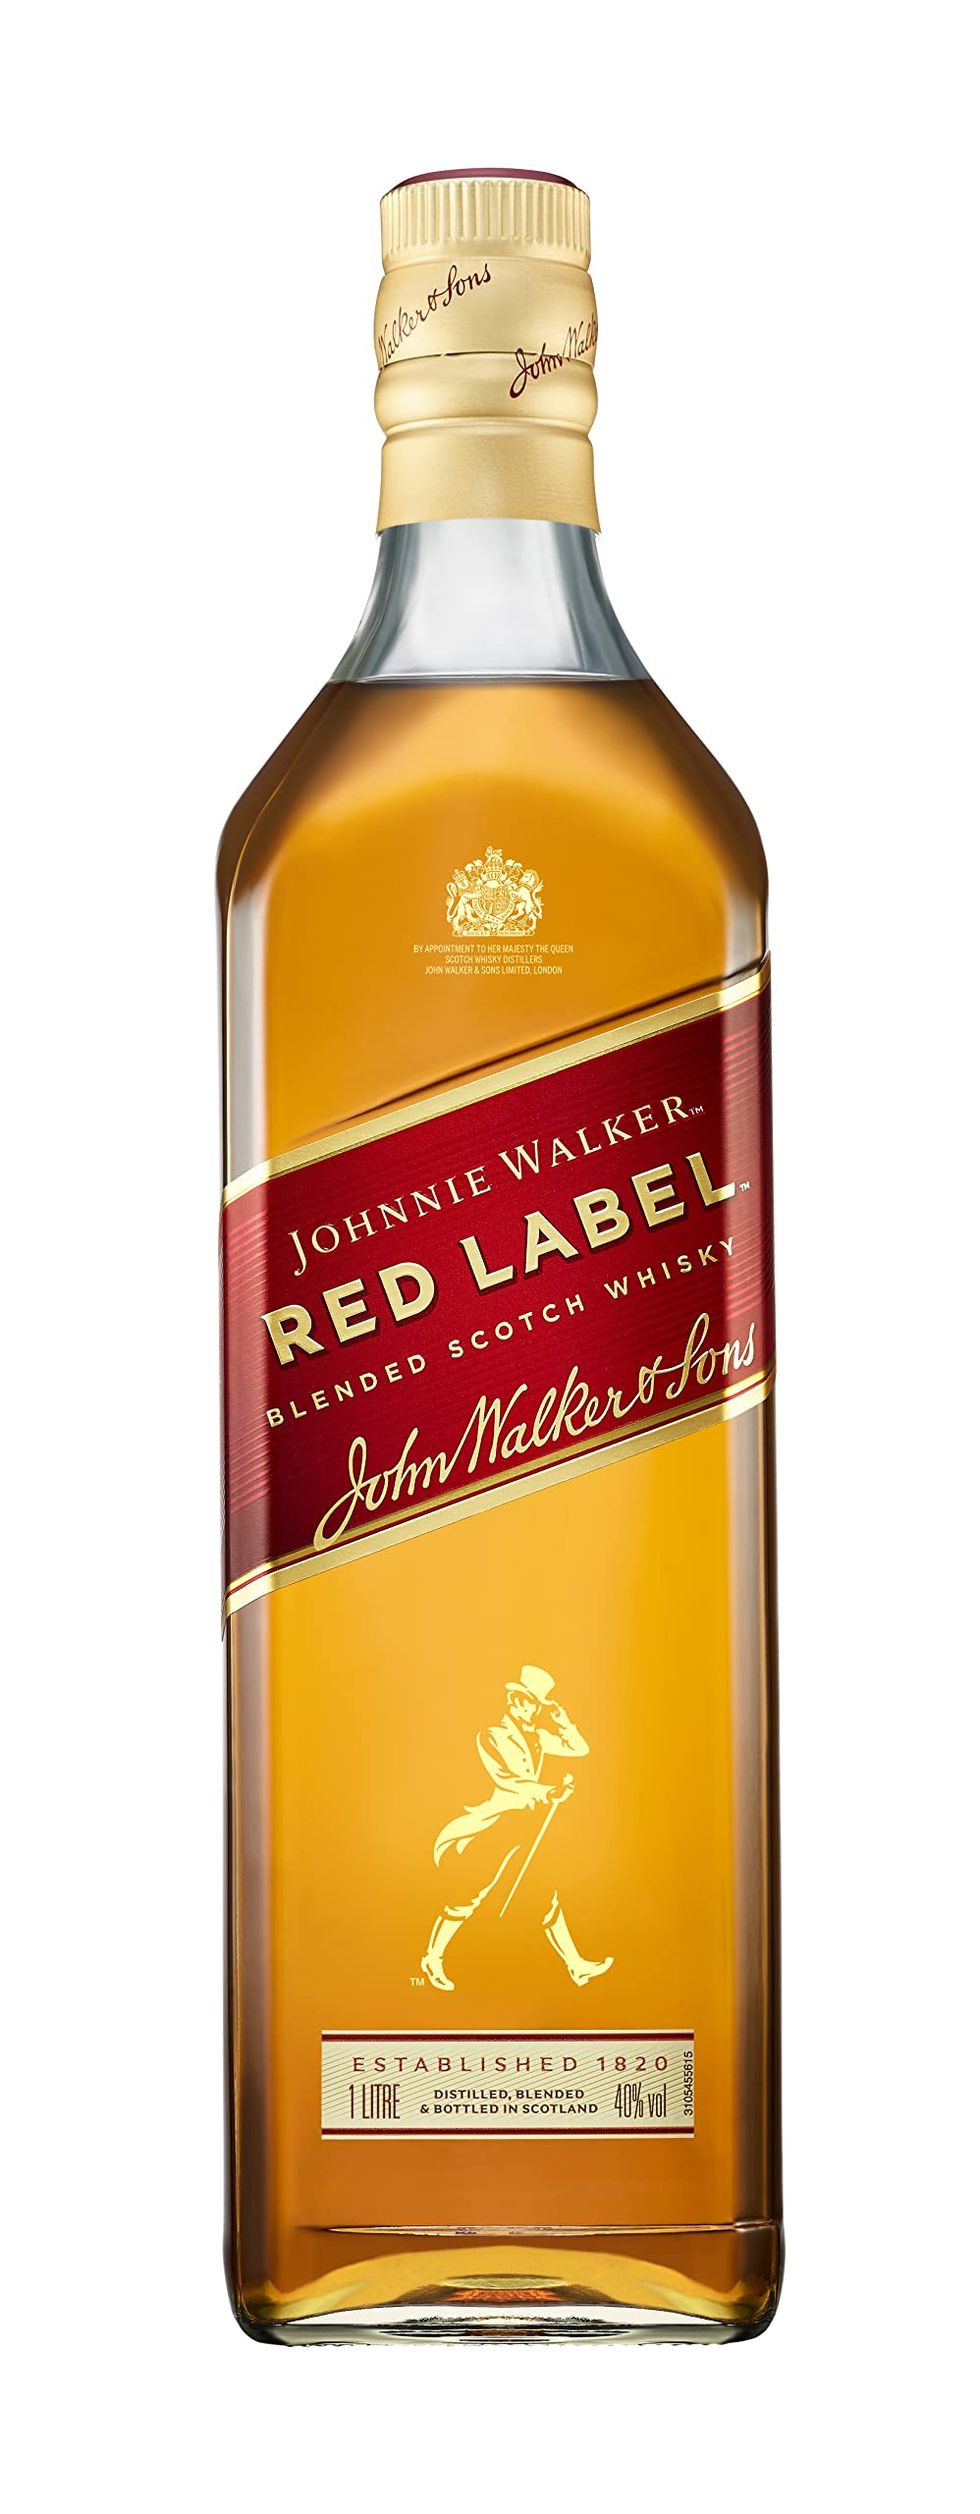 Red label whisky escocés blended, 1 l